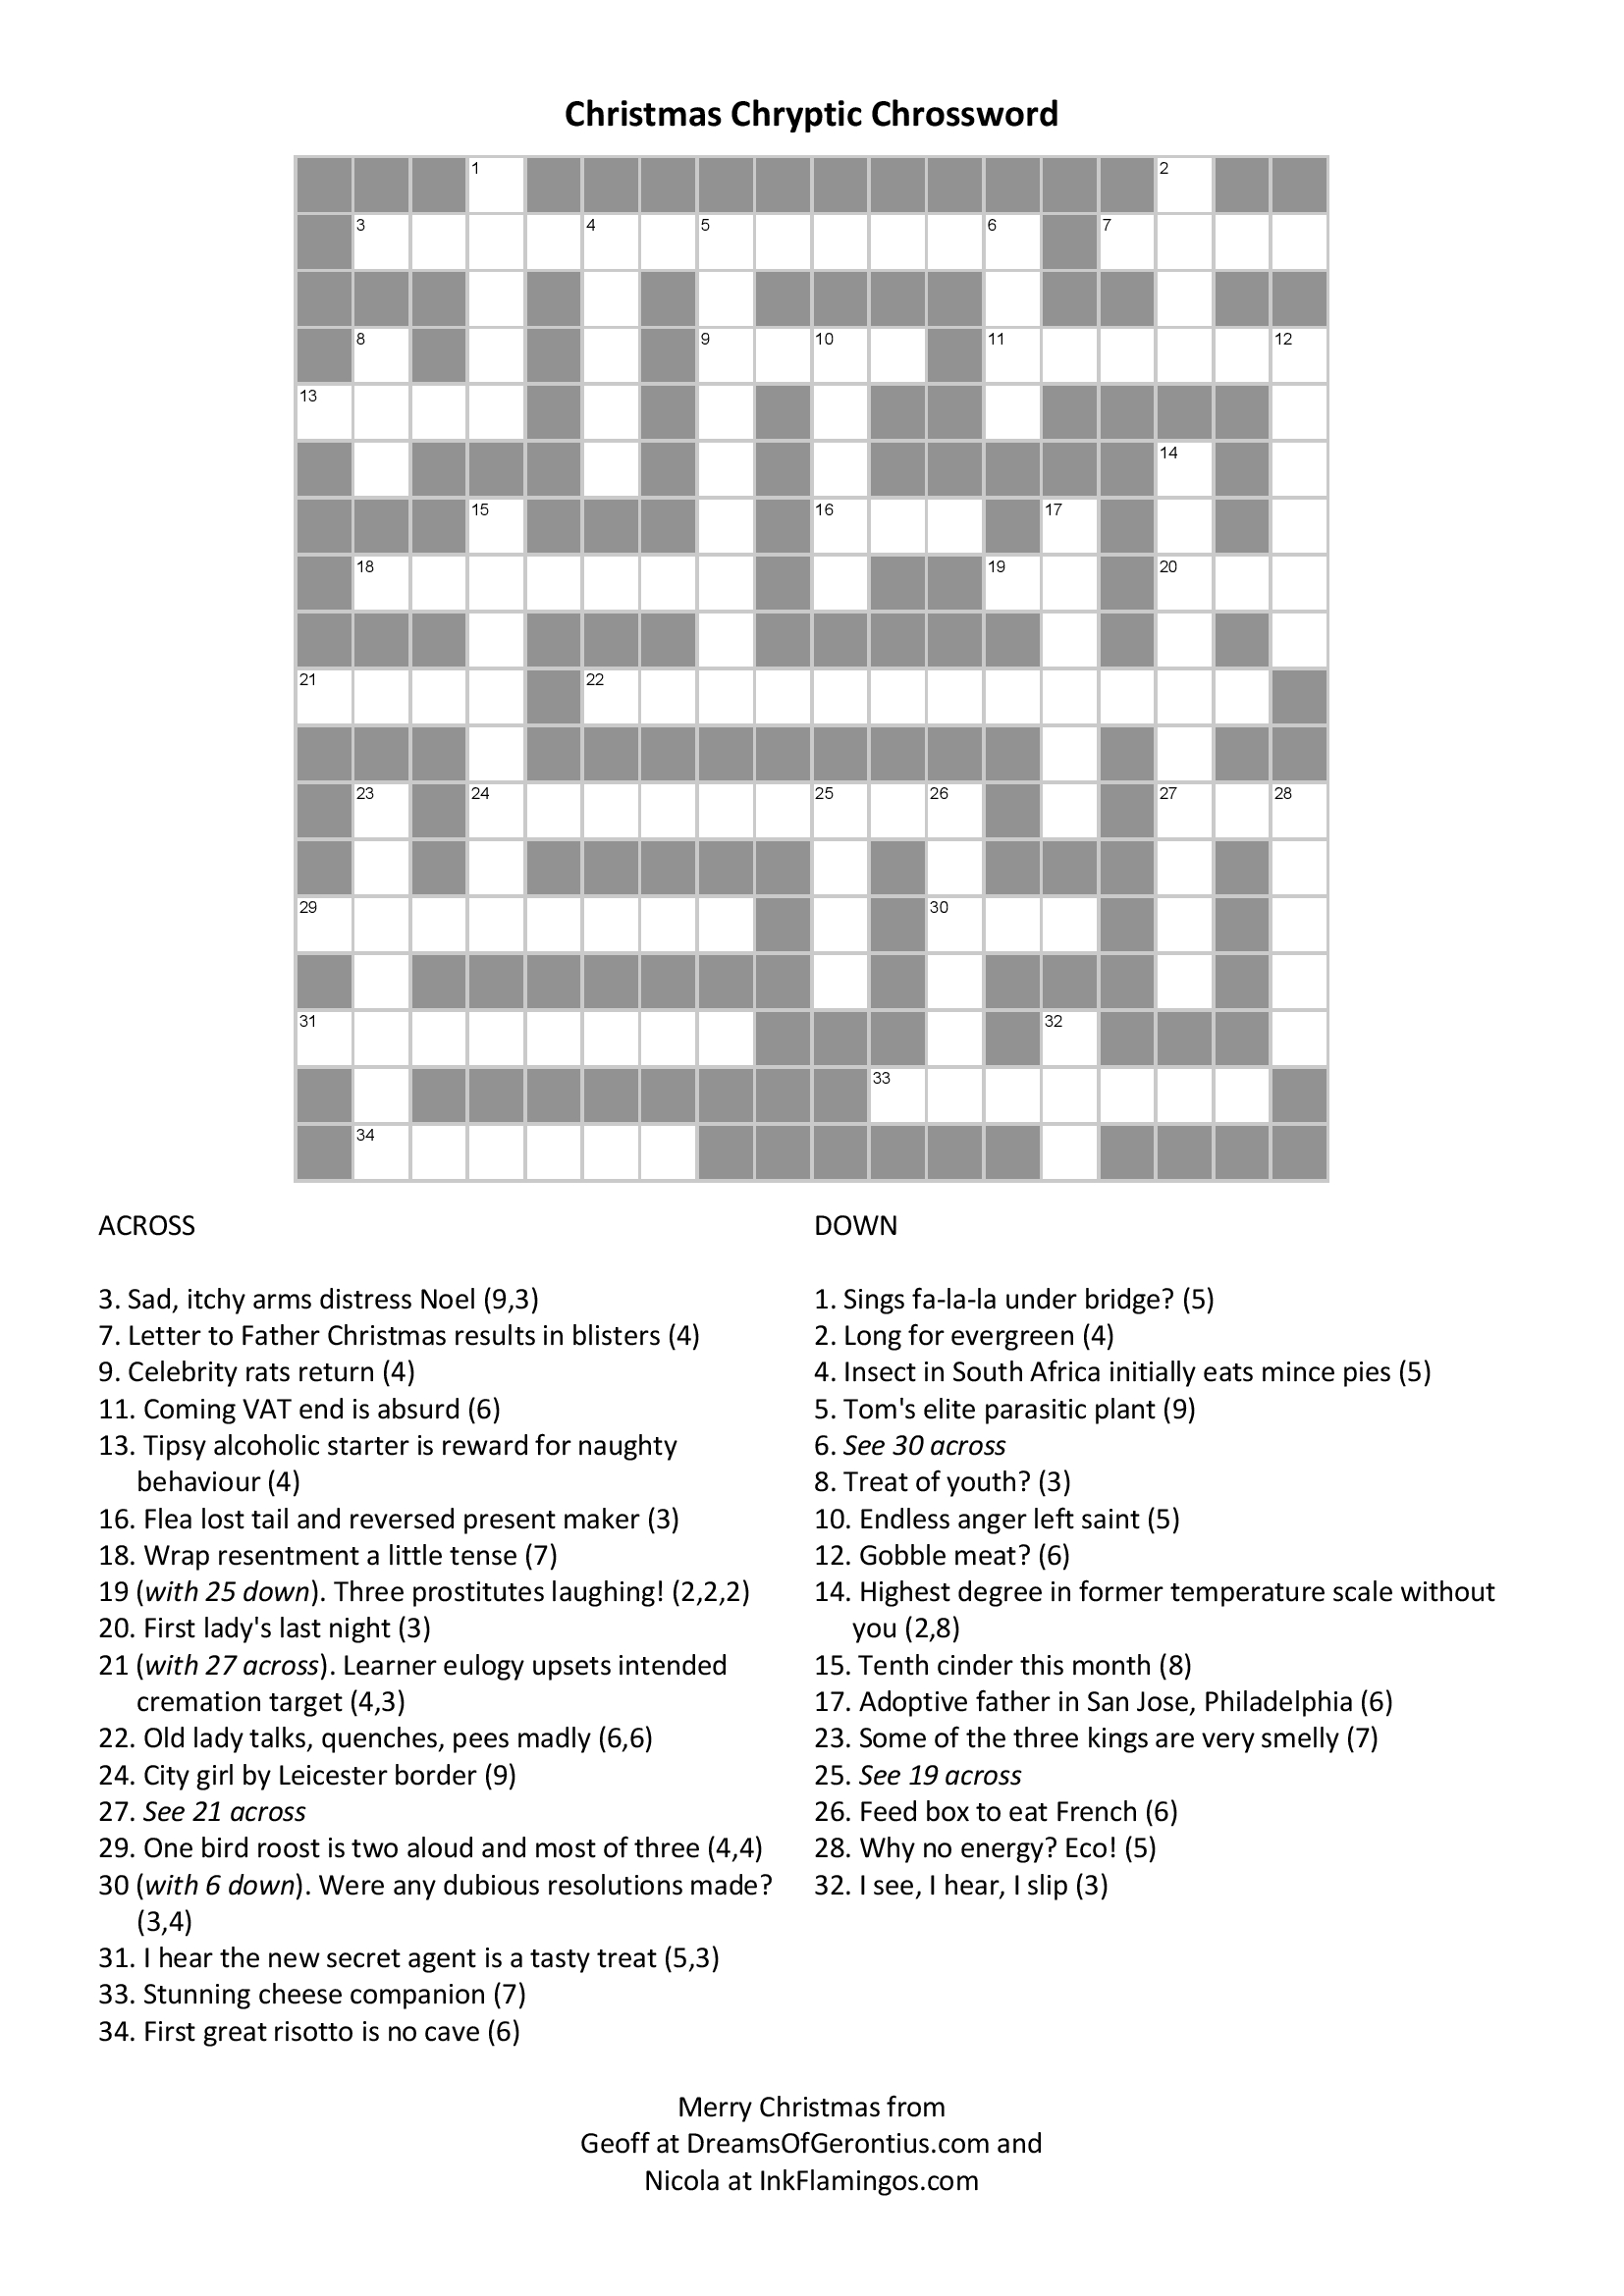 Cryptic Crossword Primer For Christmas – The Dreams Of Gerontius - Printable Cryptic Crossword